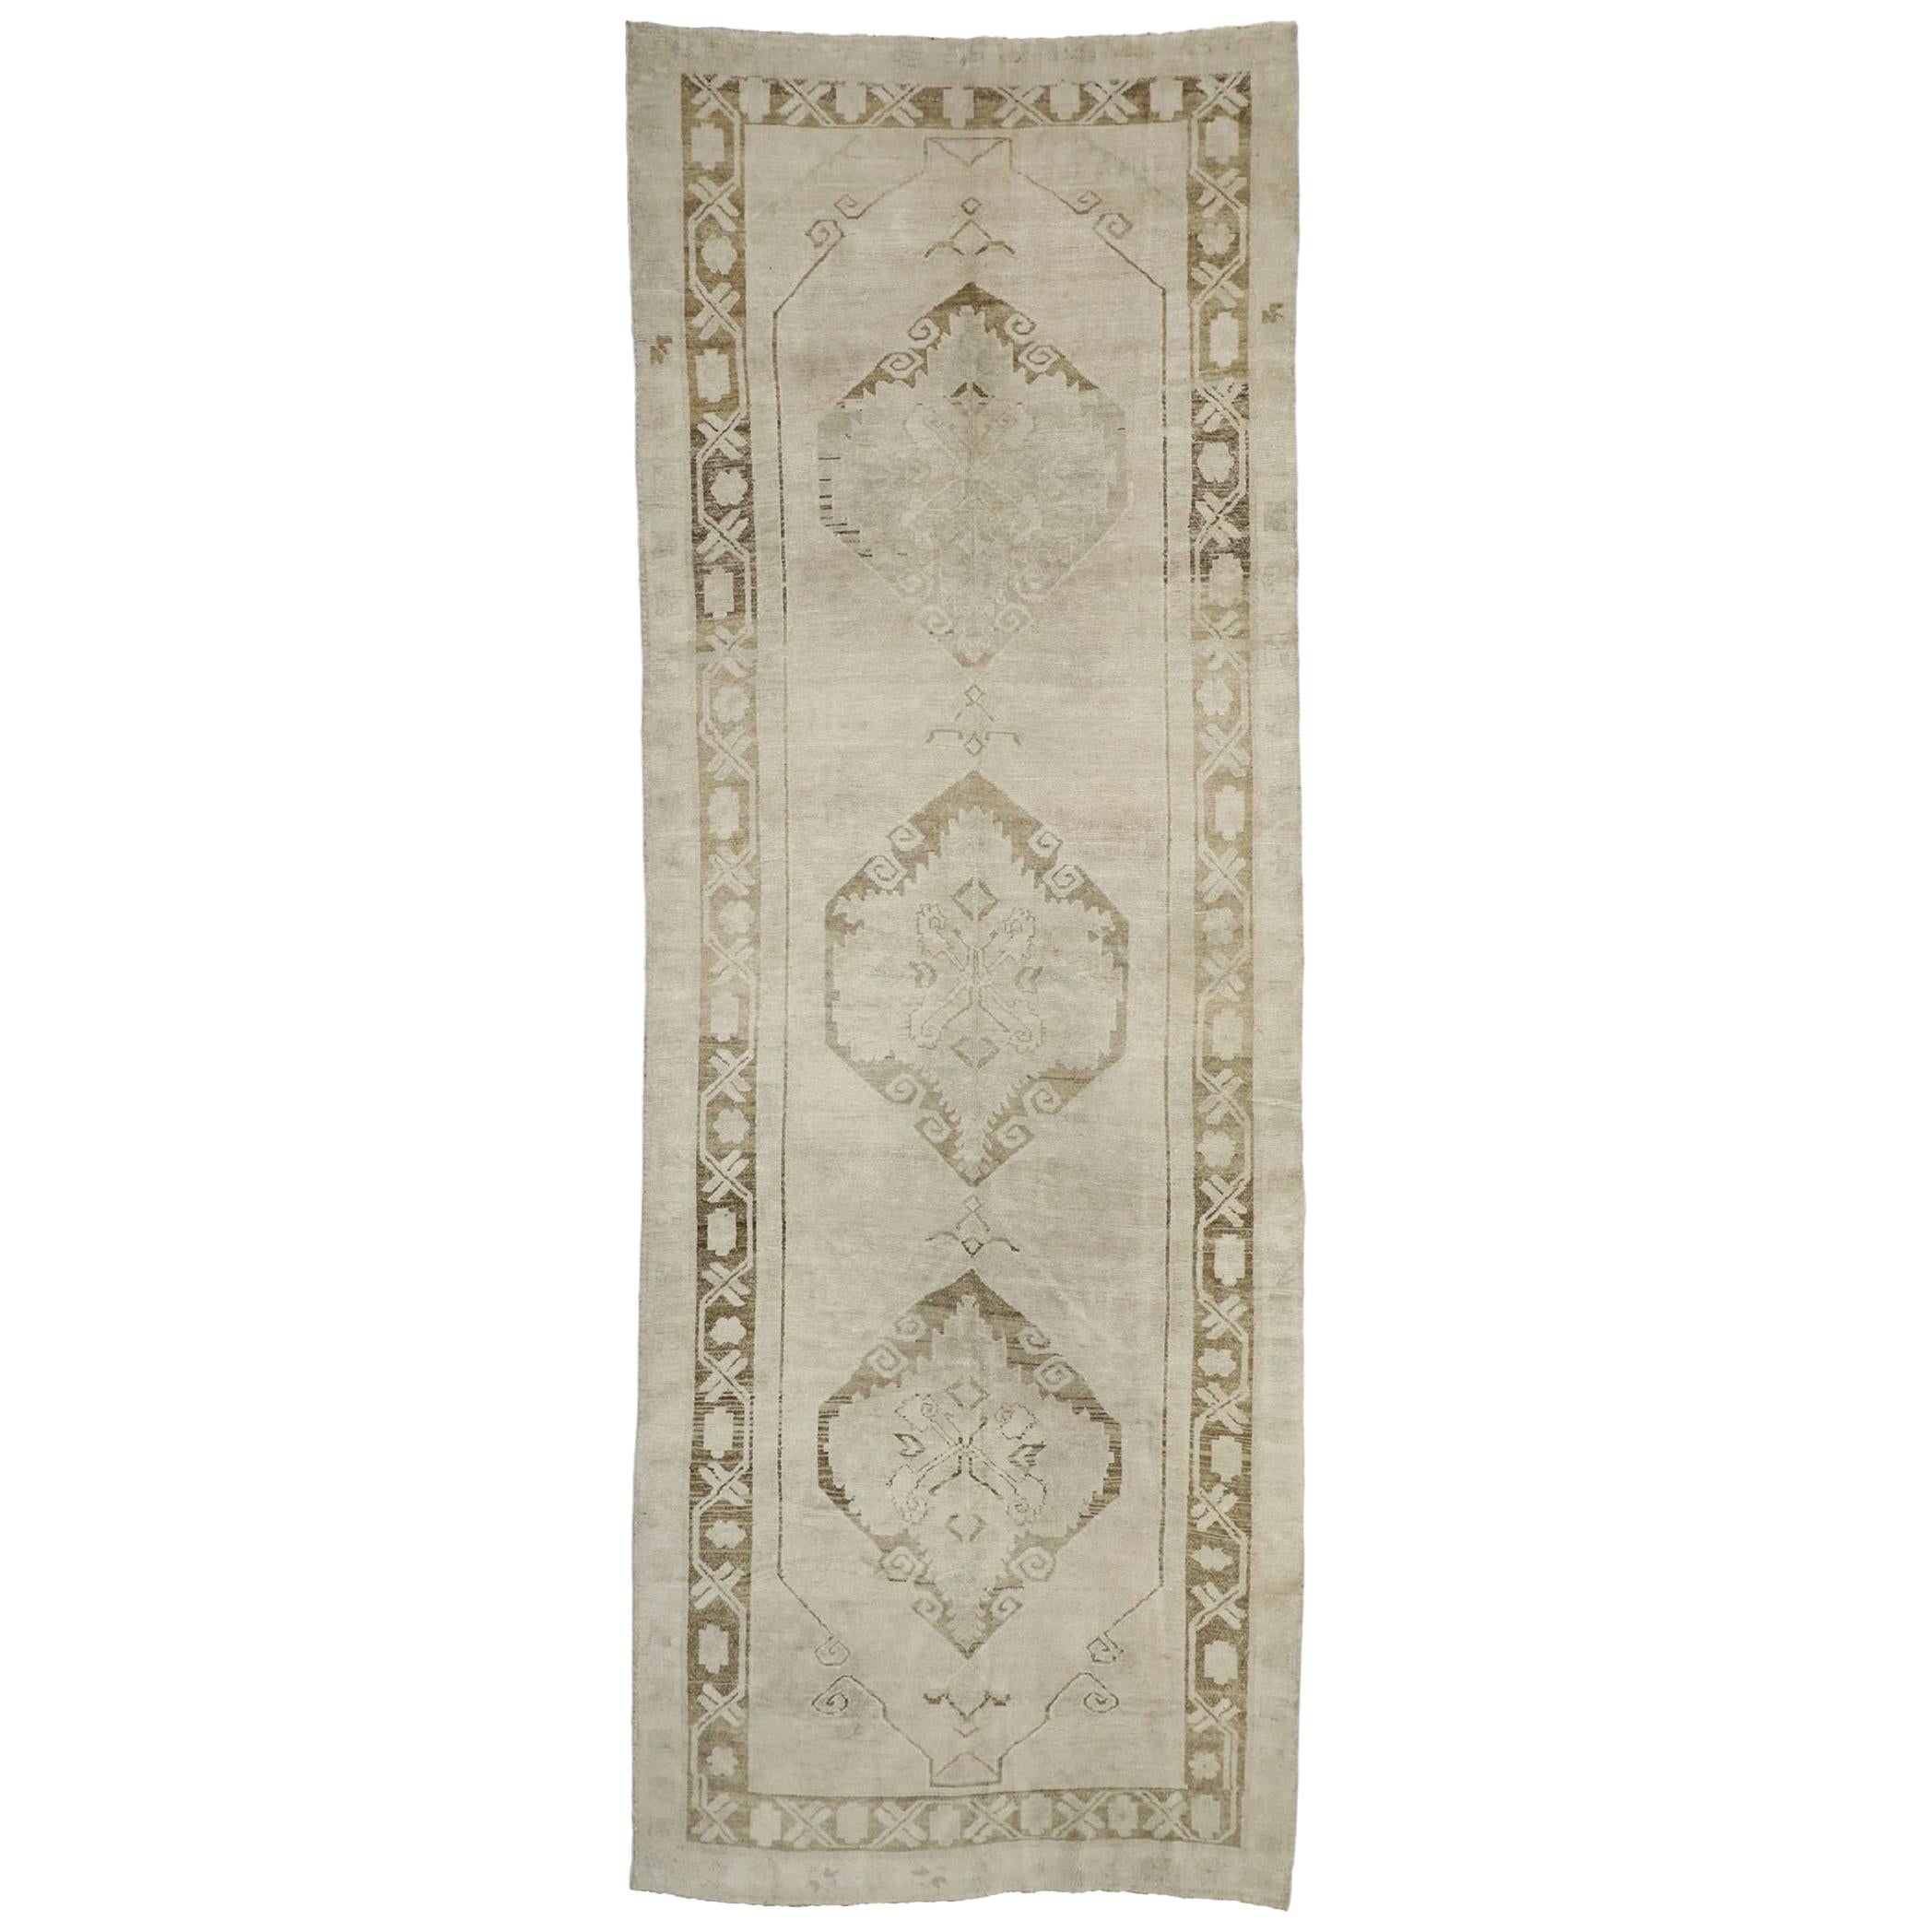 Vintage Turkish Oushak Runner with Mission Style and Warm, Earth-Tones